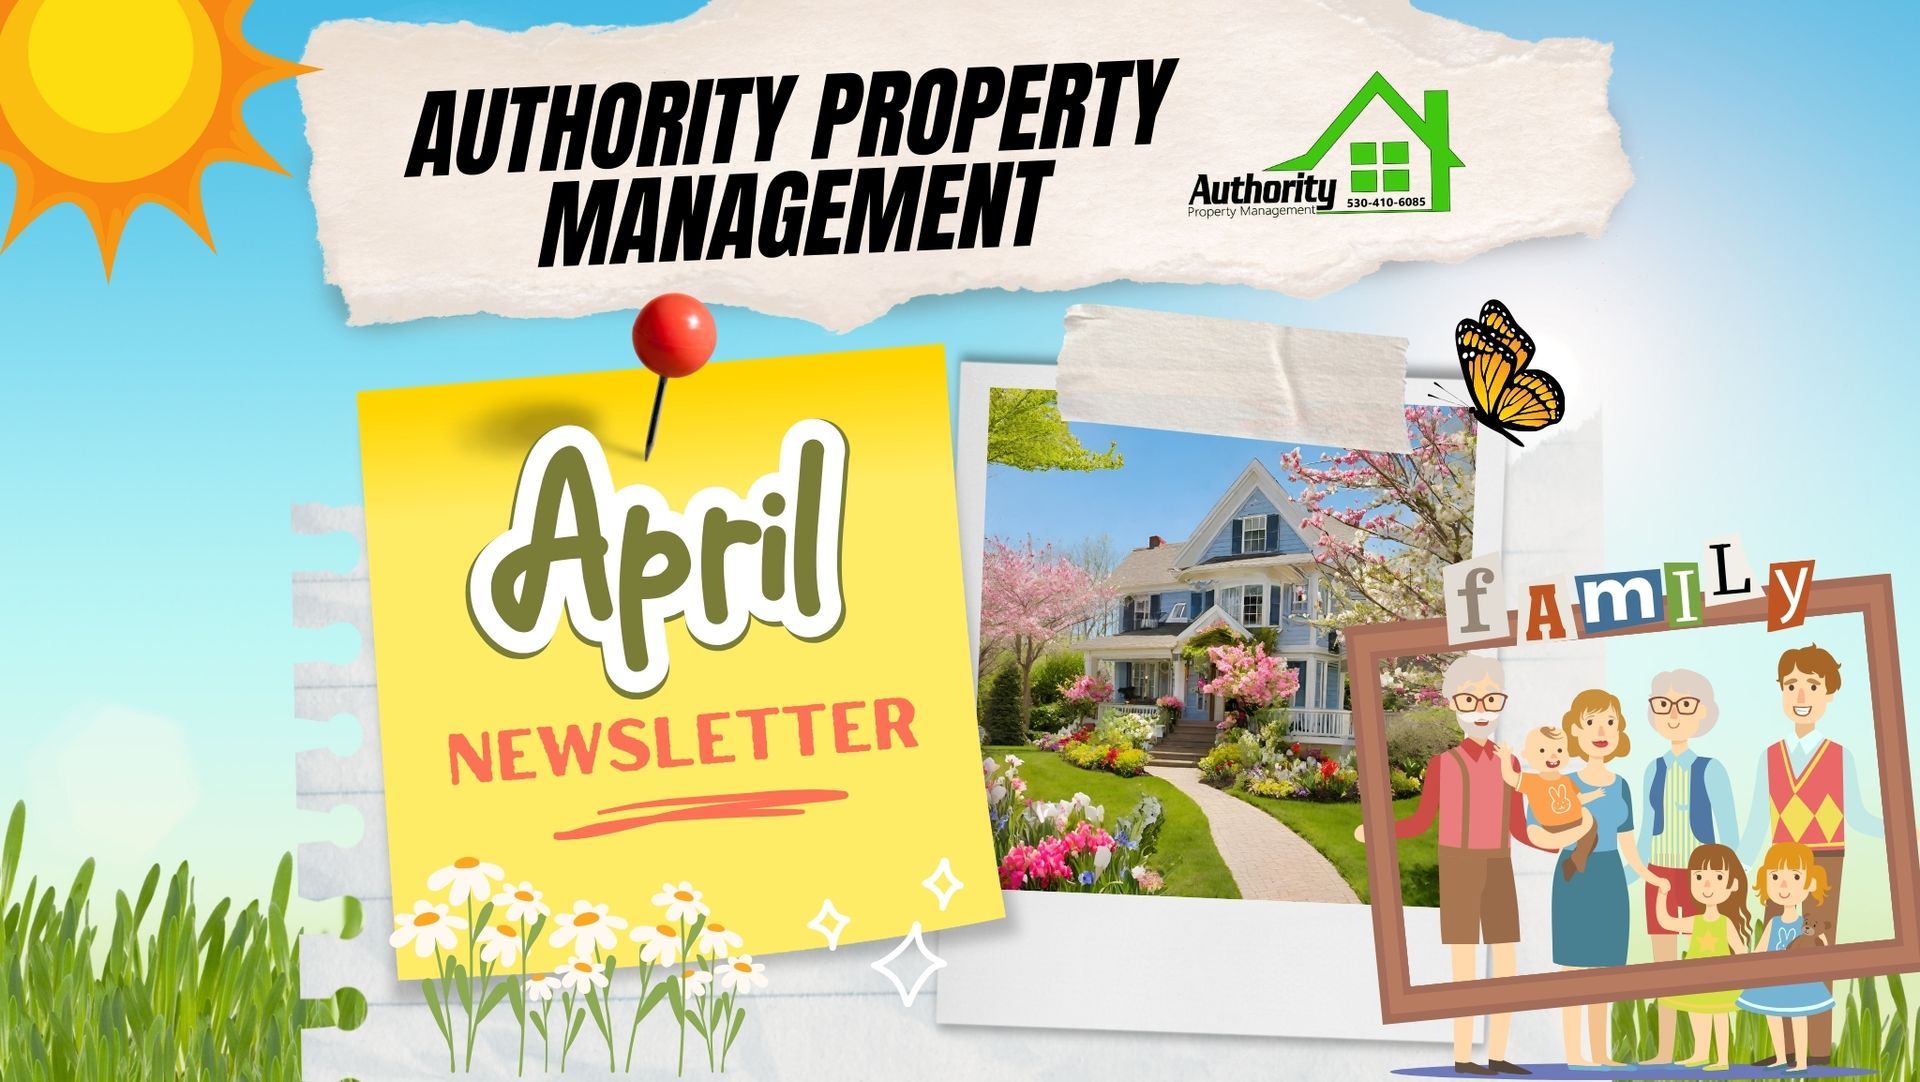 April newsletter is graphic with colorful houses, gardens, families, butterflies, and logos.